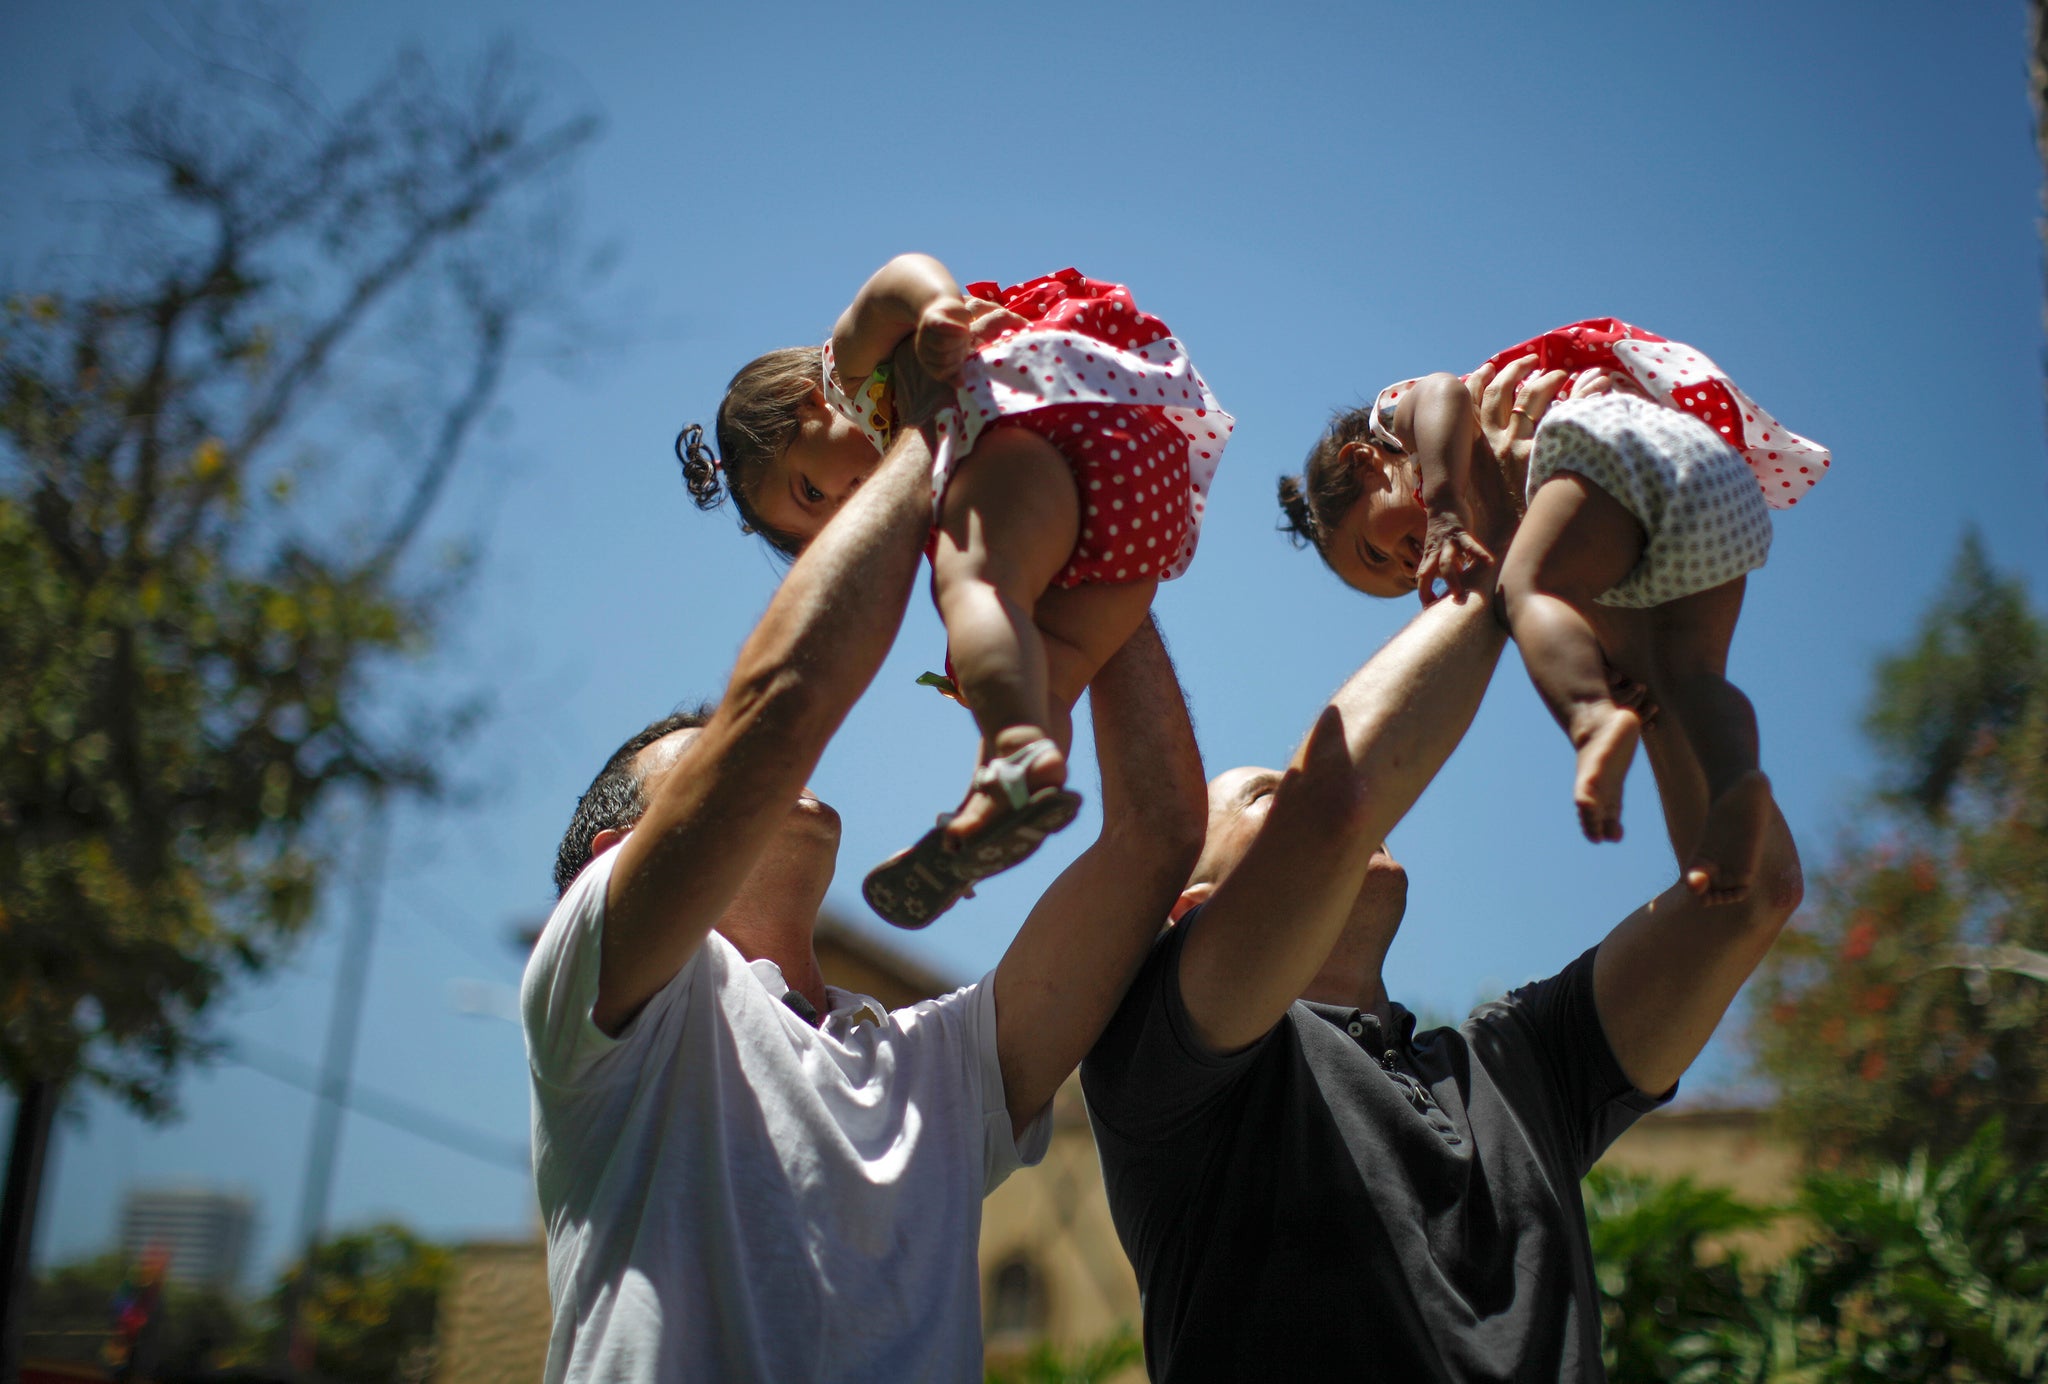 Jason Howe, 48, and Adrian Perez (L), 48, who were married in Spain, and again in California, hold their one-year-old twin daughters Clara (R) and Olivia at a playground in West Hollywood.